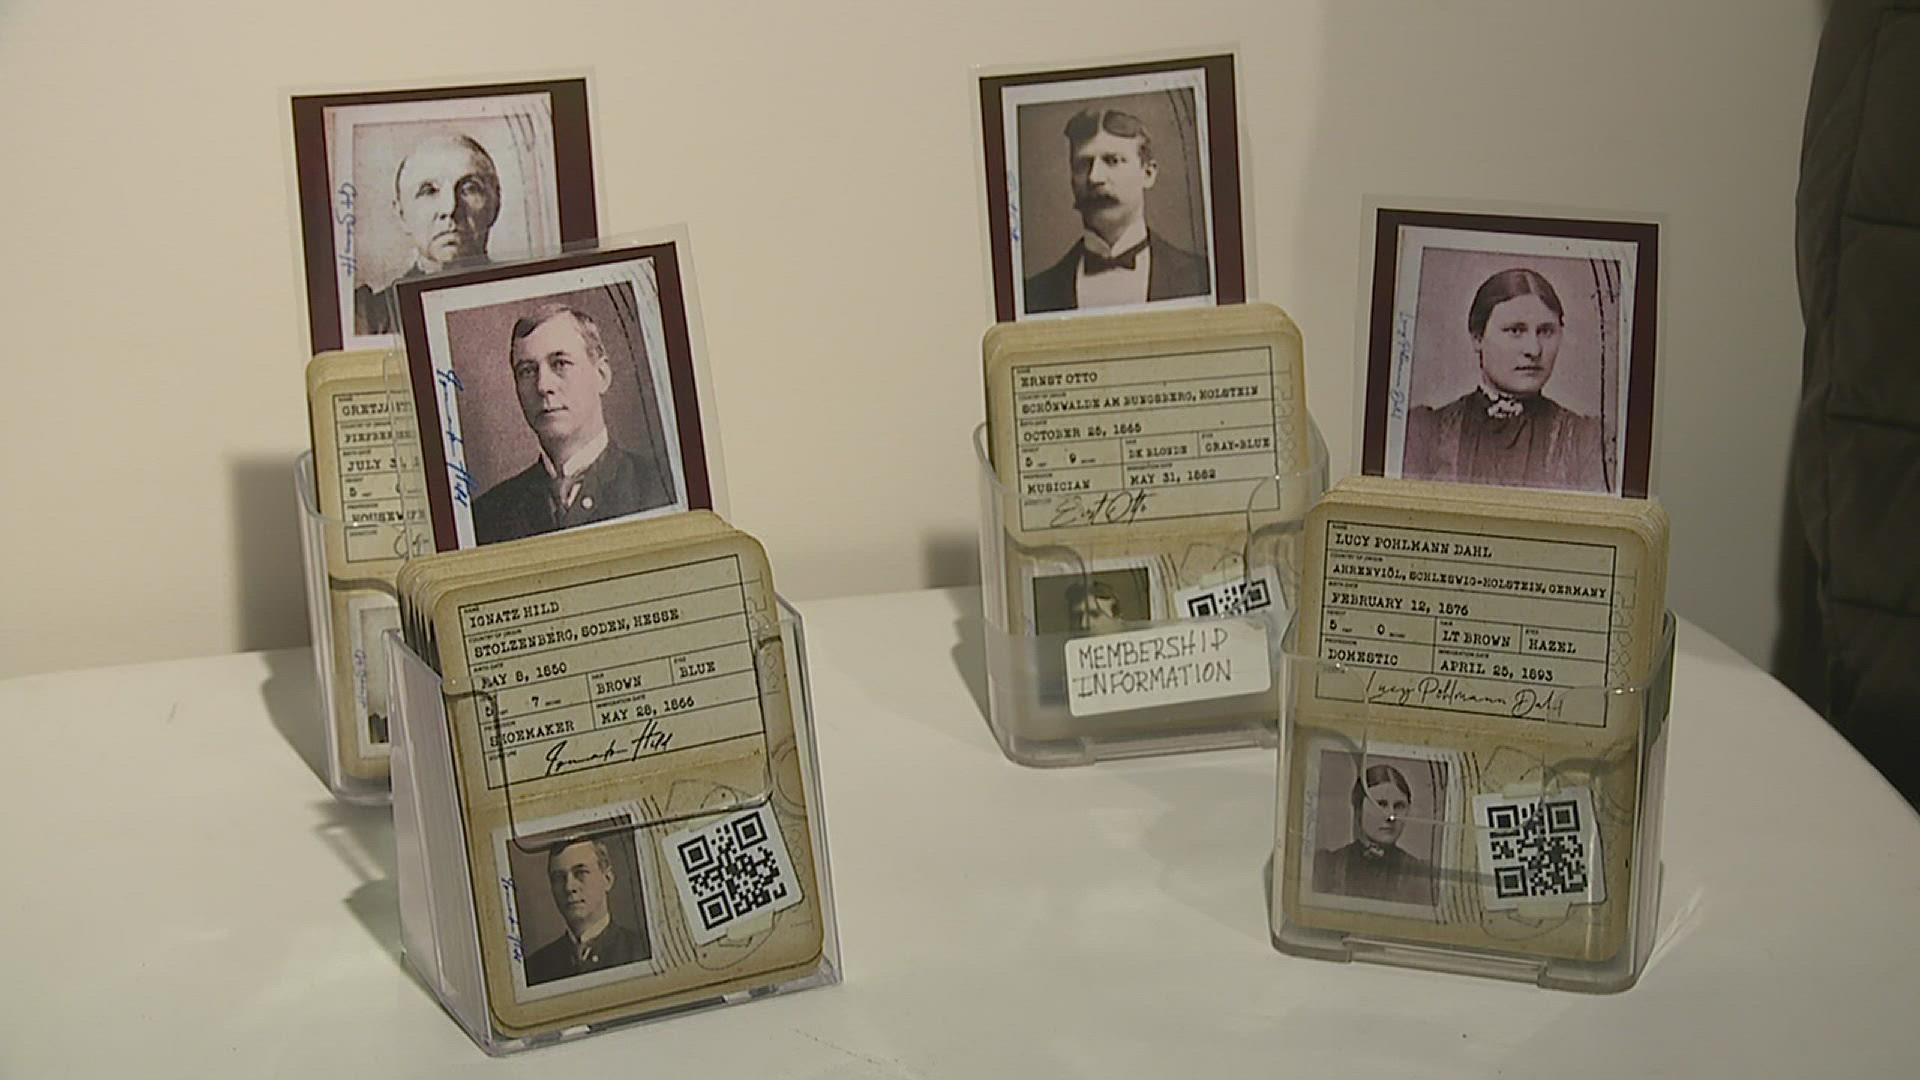 The Immigrant Passport Experience allows visitors to interact with the stories of real people who immigrated to Davenport.